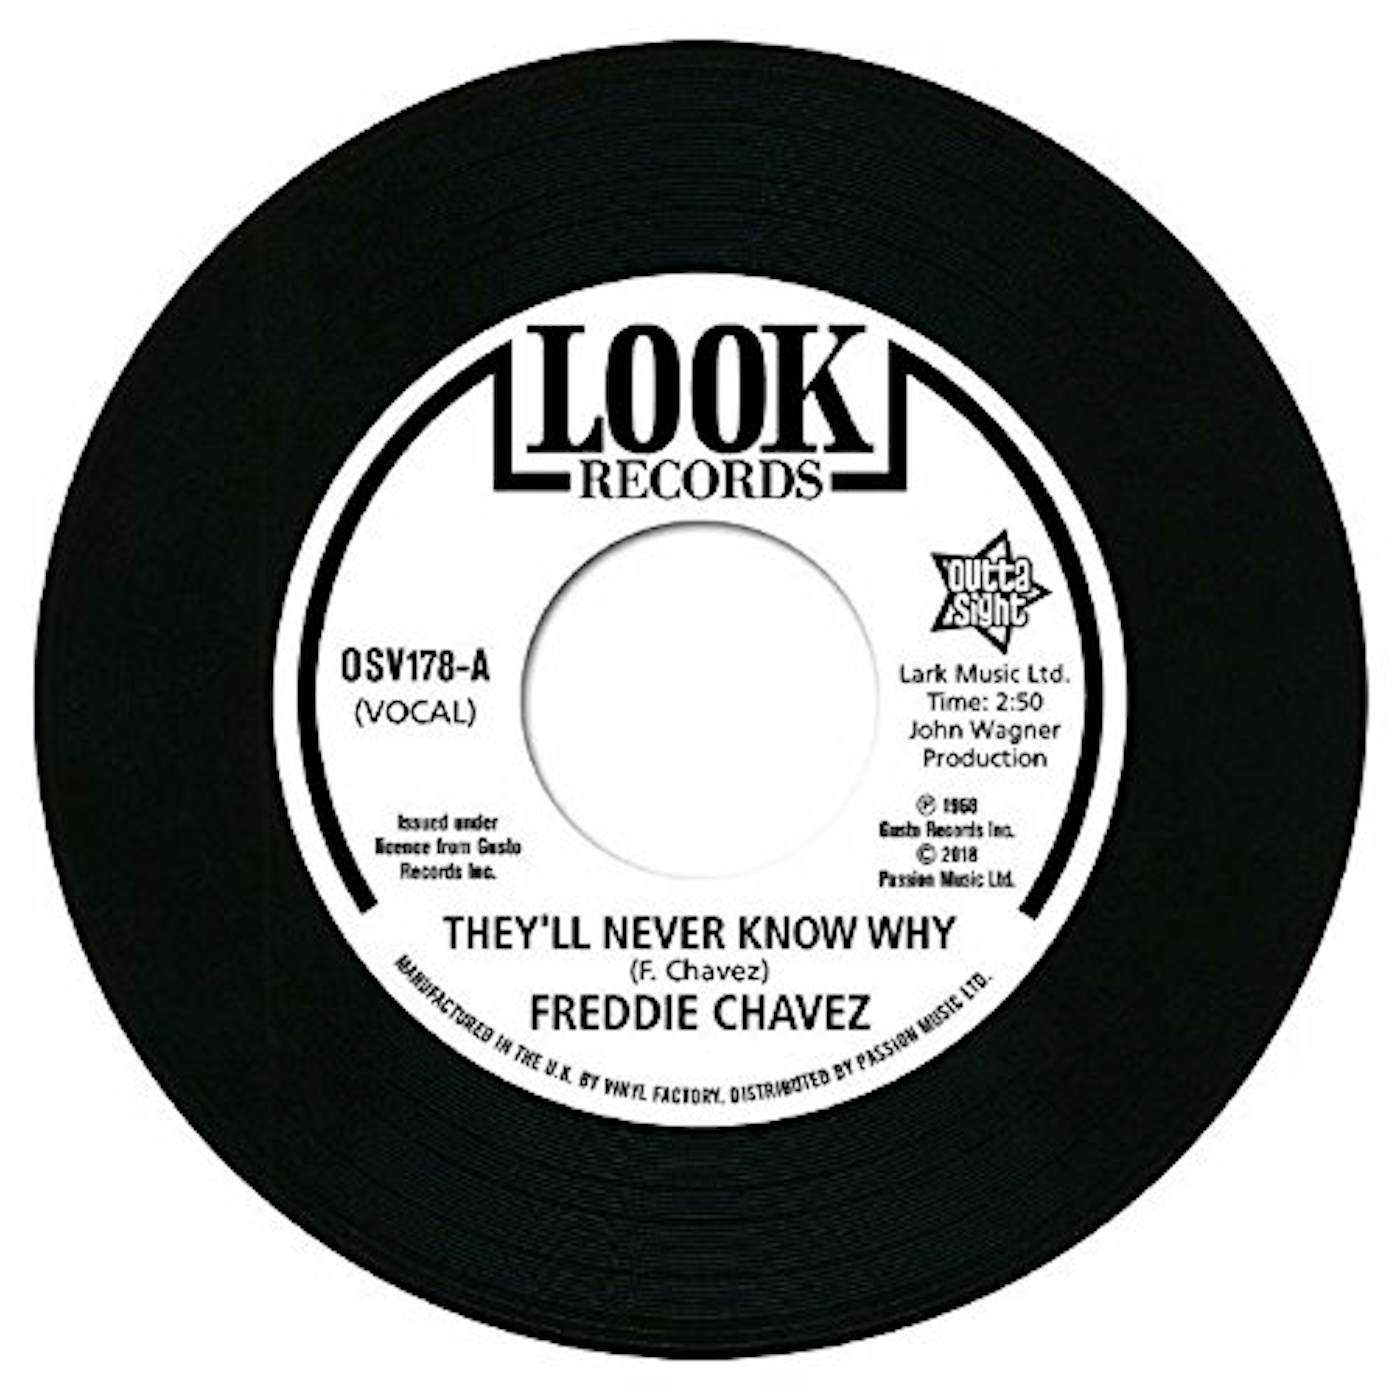 Freddie Chavez THEY'LL NEVER KNOW WHY / MAKE UP YOUR MIND Vinyl Record